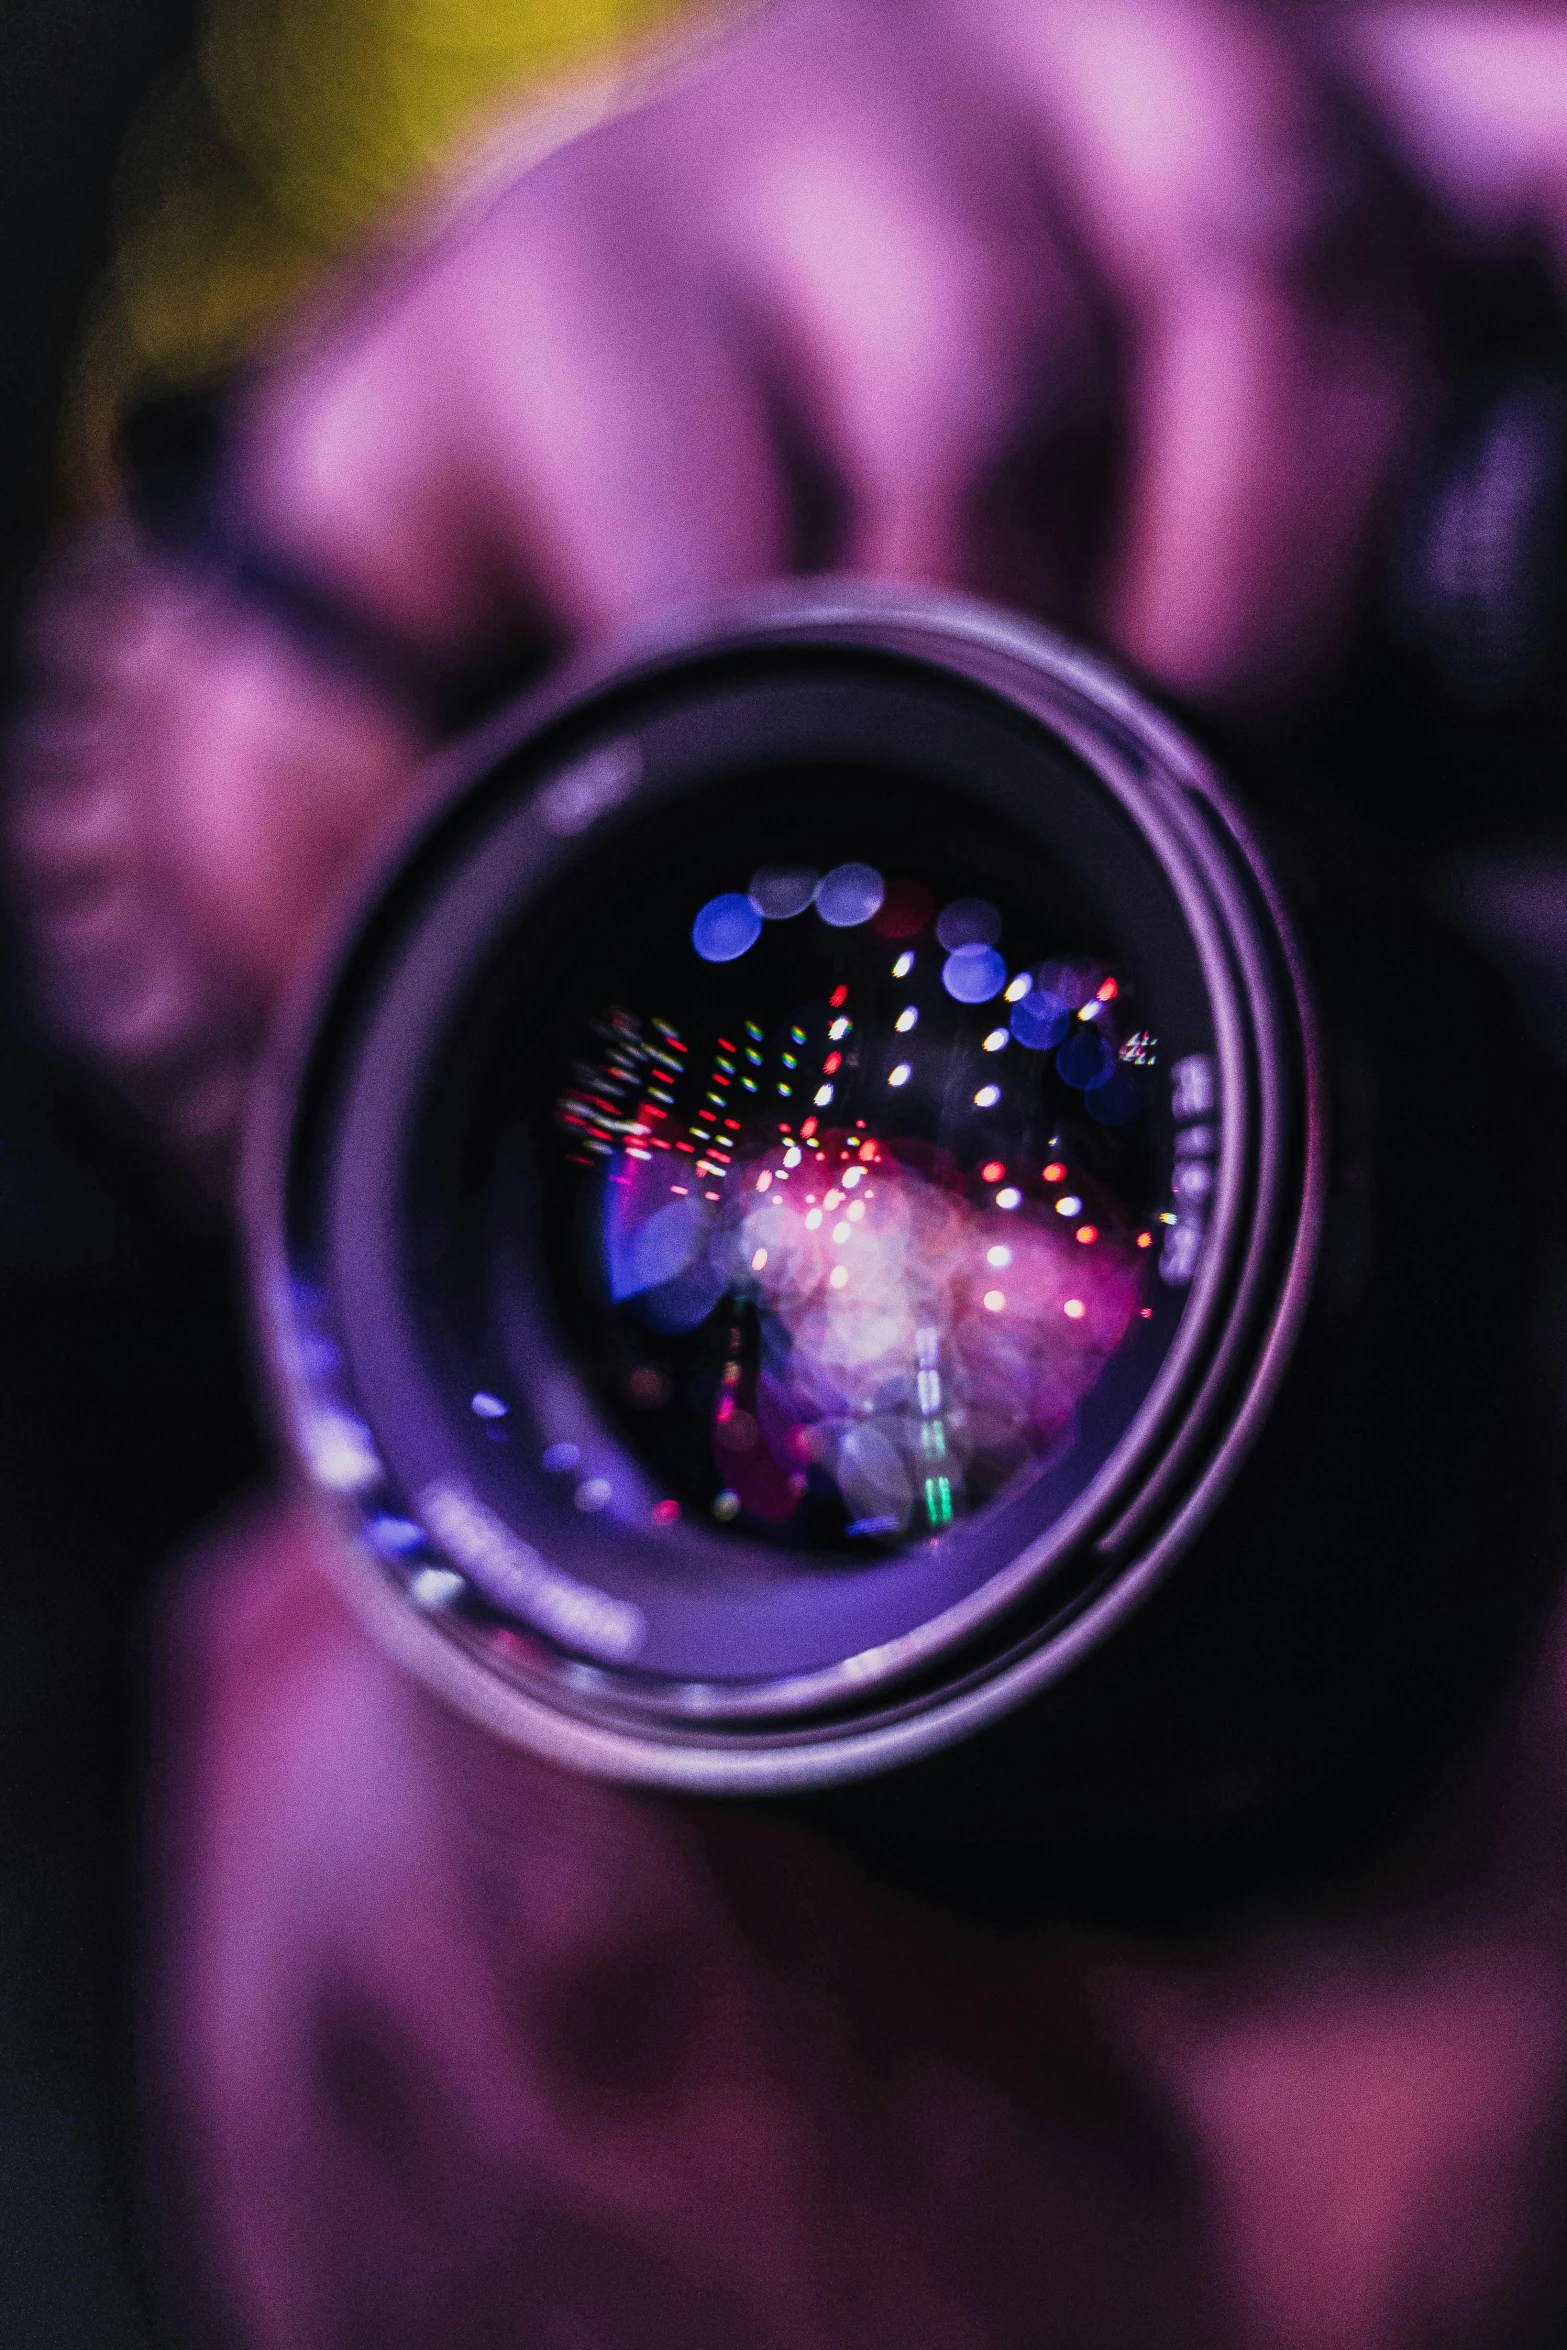 a close up of a person holding a camera, pexels contest winner, art photography, holographic display lenses, purple filter, macro lense, bokeh. i